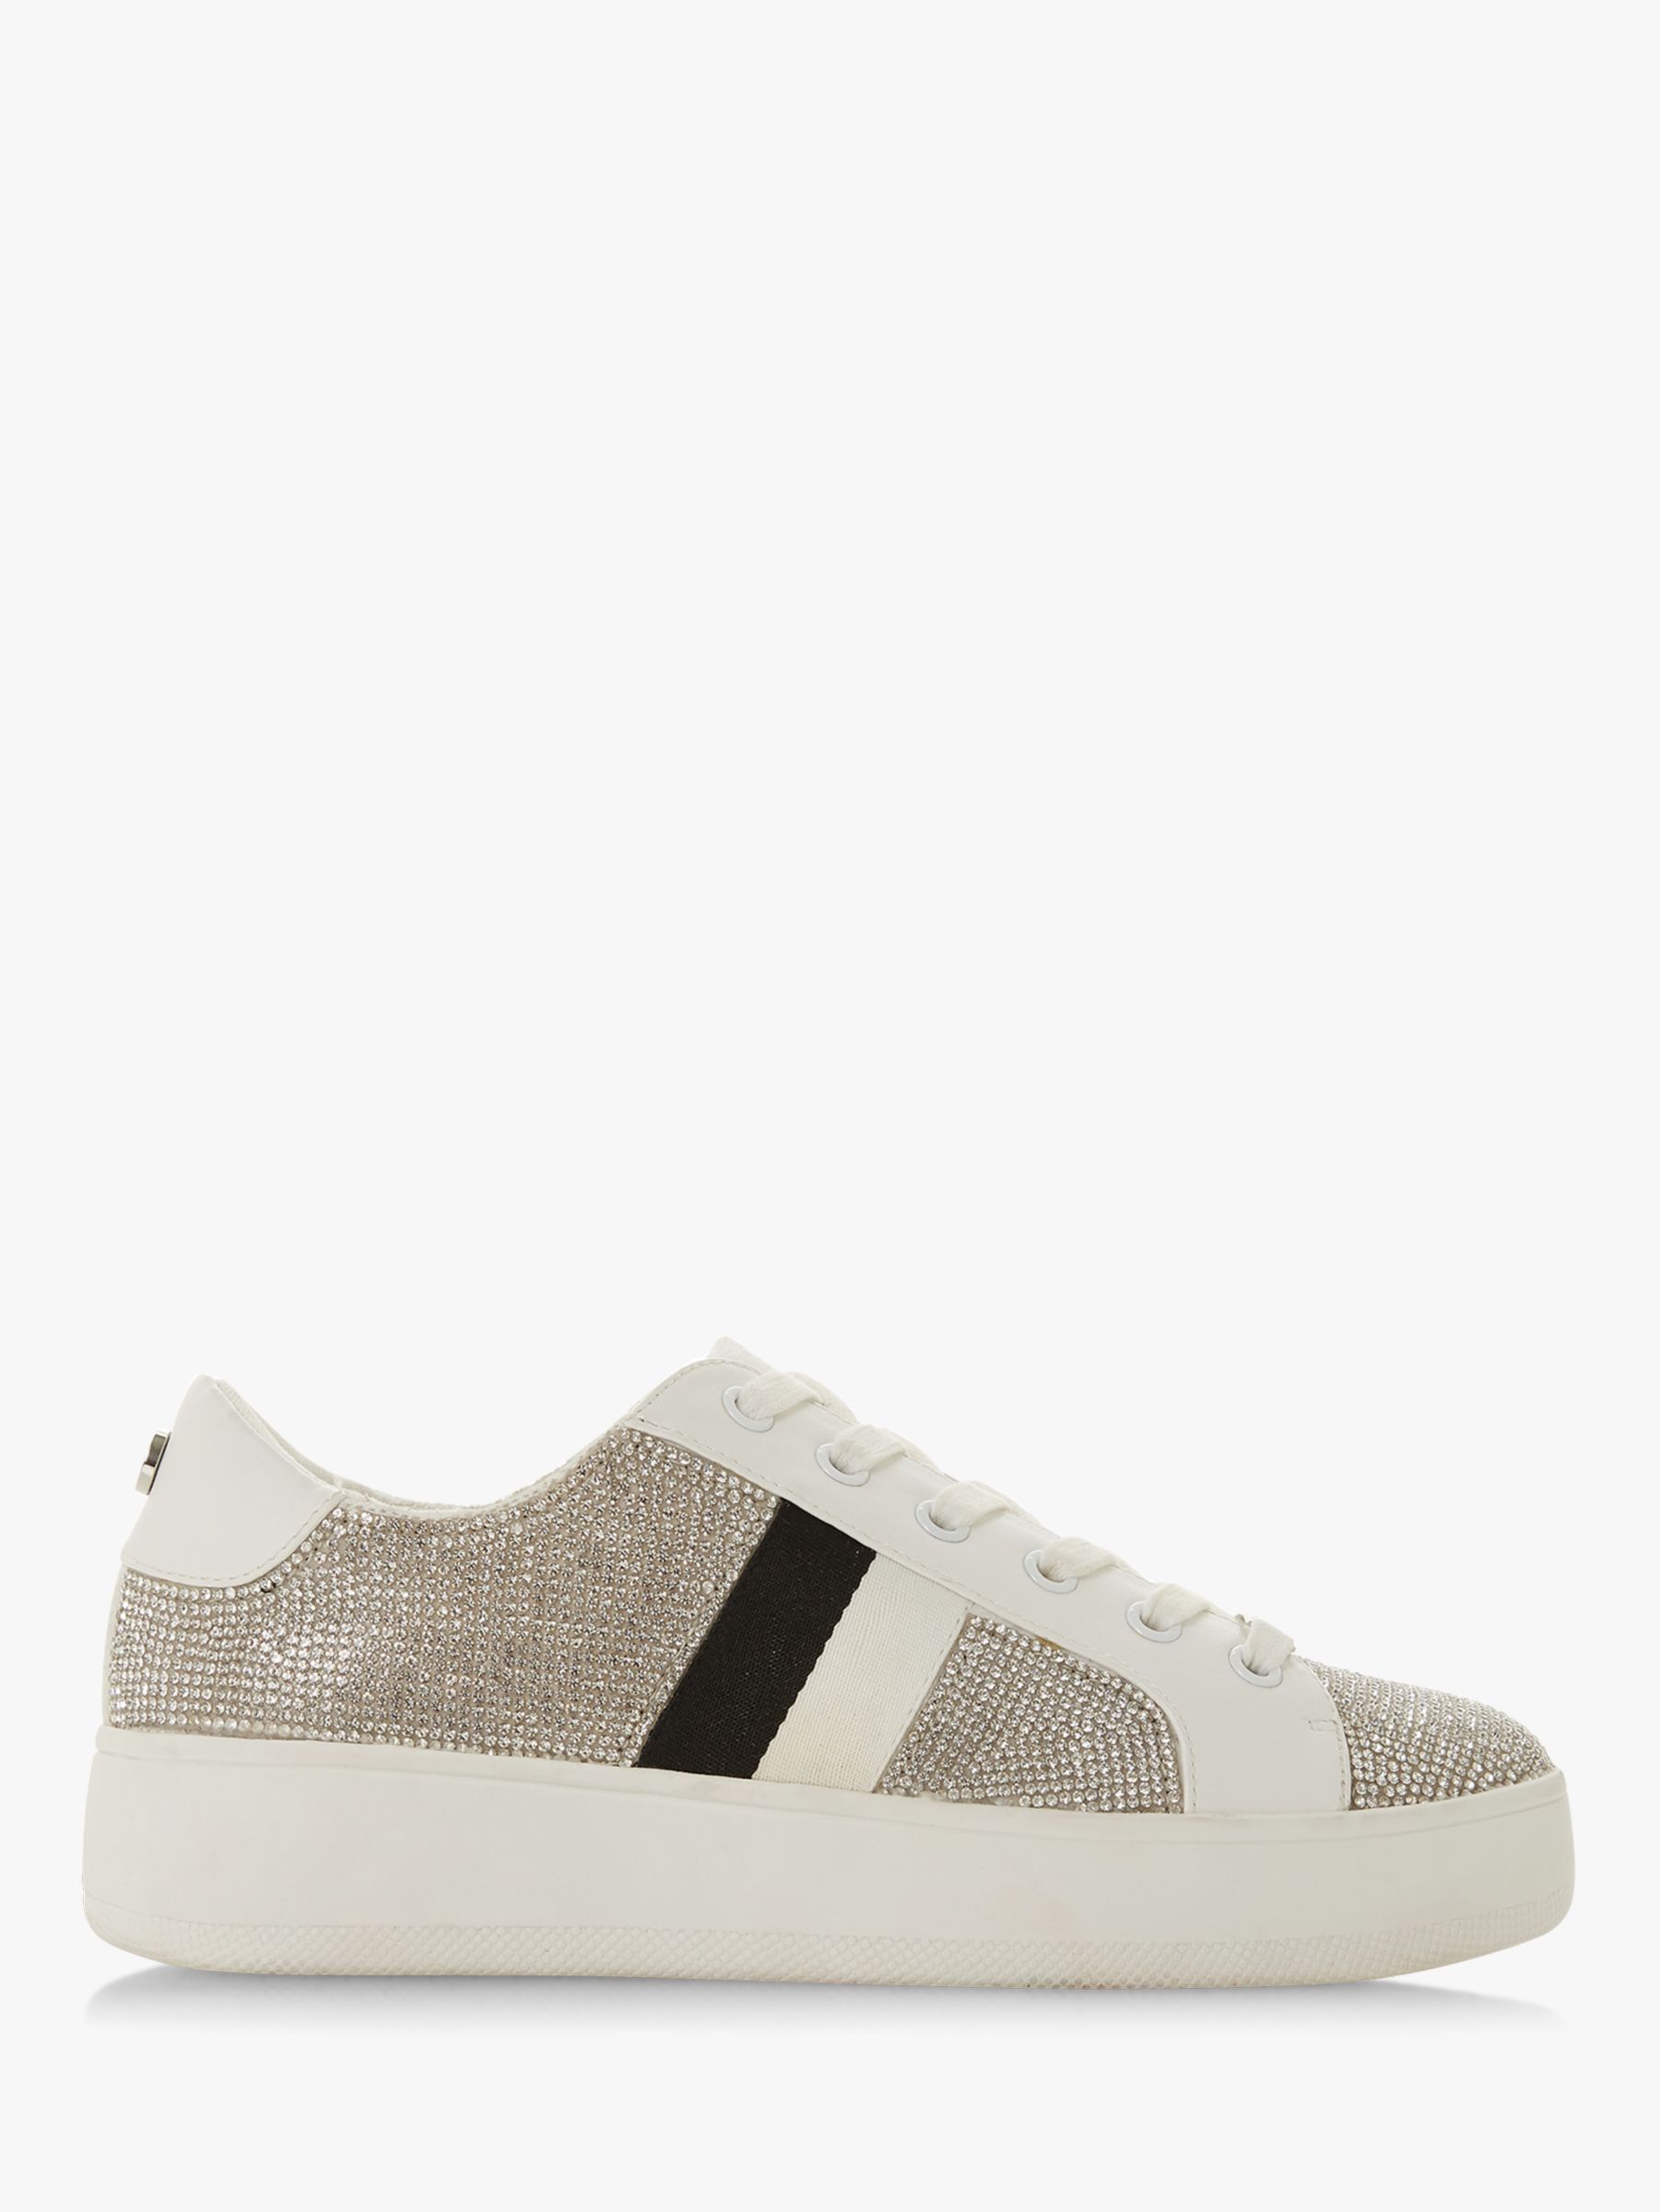 Steve Madden Belle-R Embellished Up Trainers, Silver Diamante